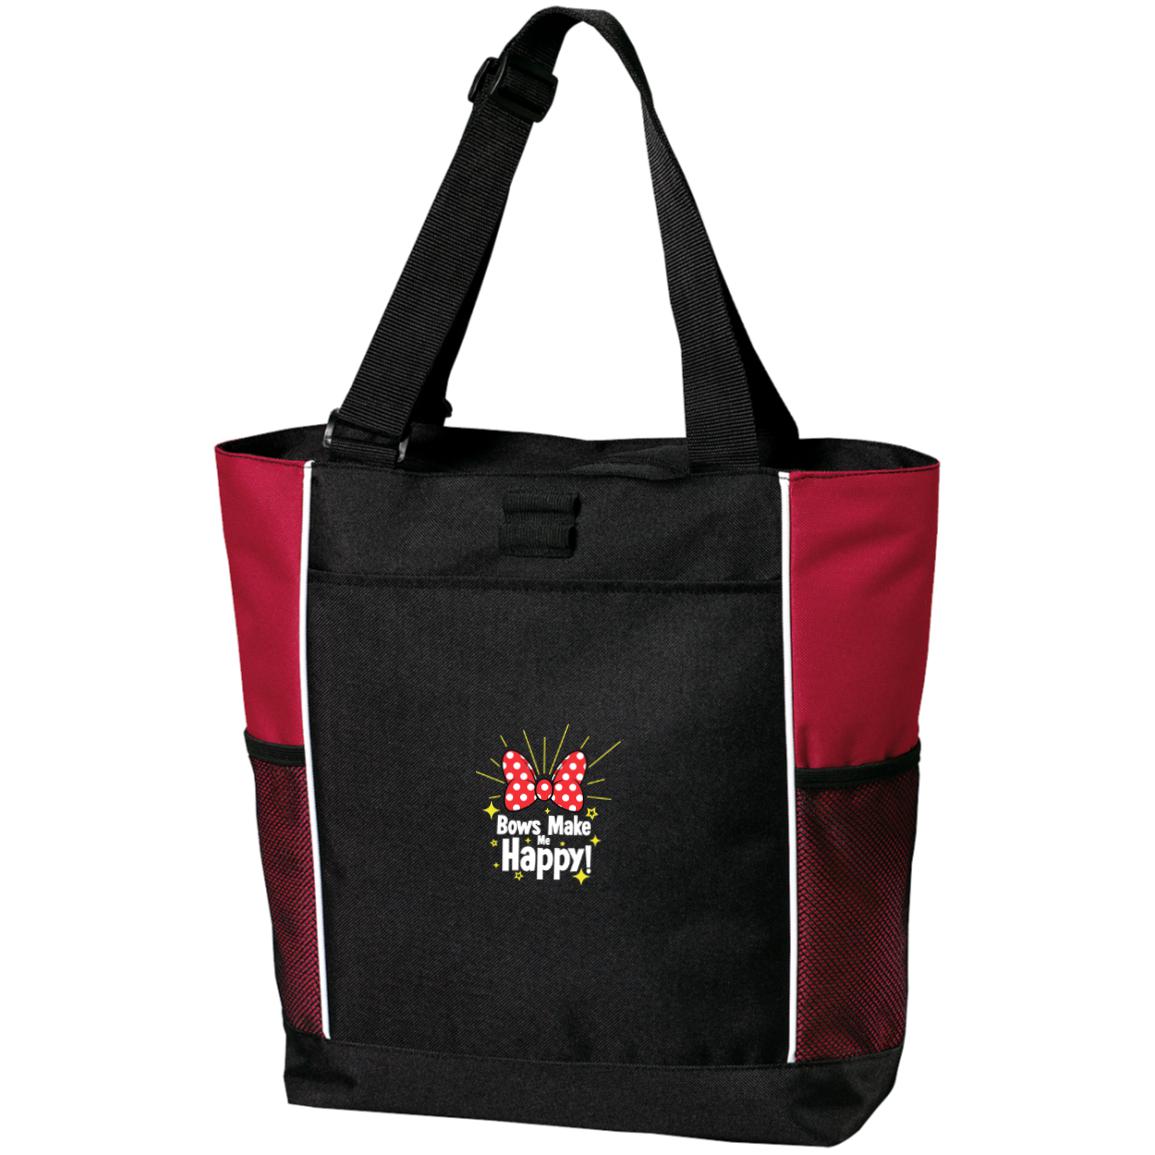 Bows Make Me Happy - Embroidered Port Authority Colorblock Zipper Tote Bag